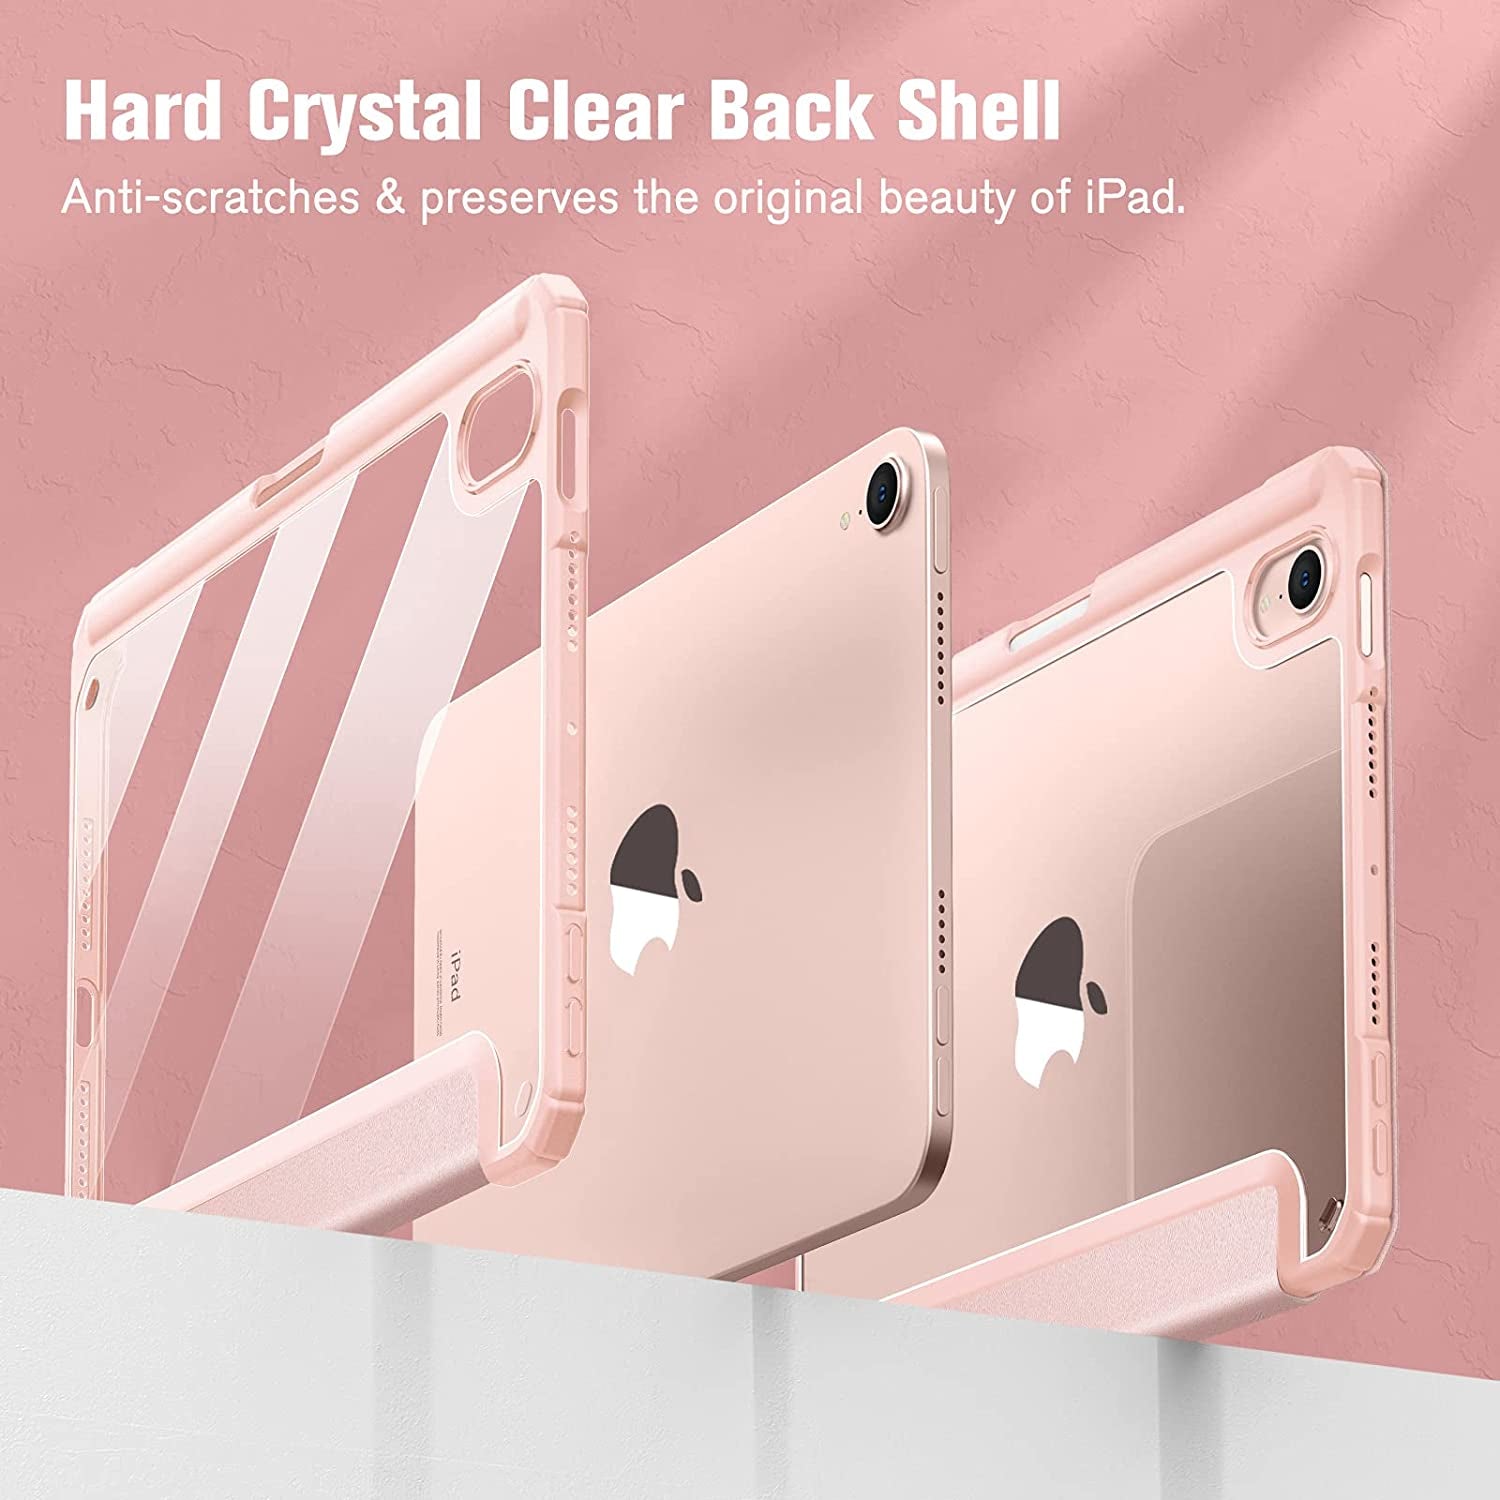 Protective Flip Case For iPad Air 4 5 Case For iPad 6th 9th 10th Gen Case for iPad Mini 6 Cover